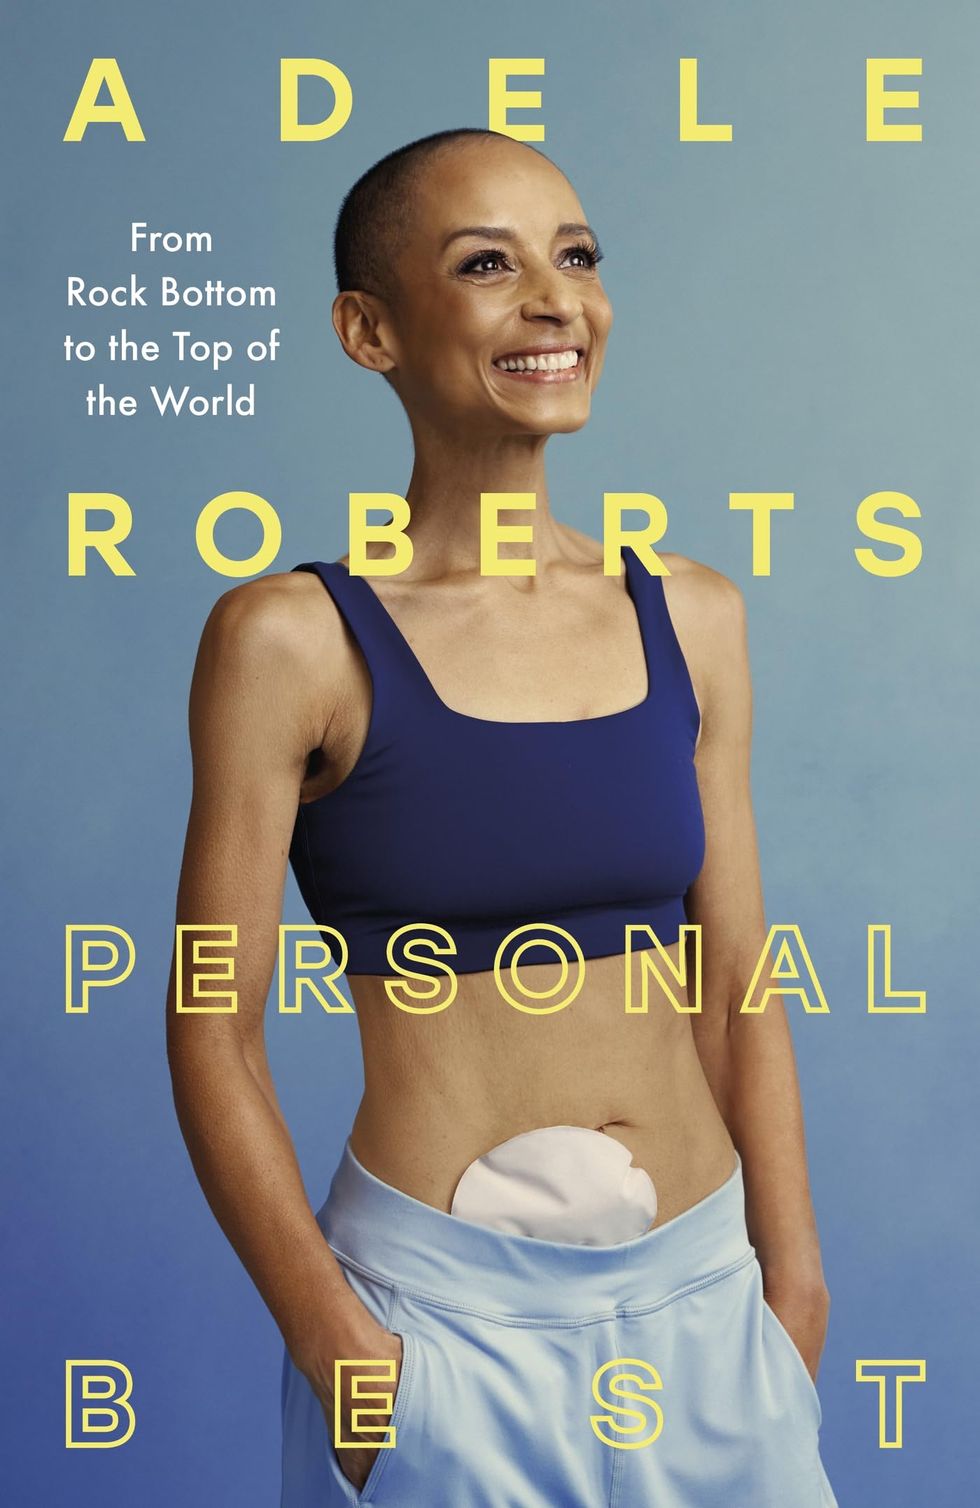 'Personal Best: From Rock Bottom to the Top of the World' by Adele Roberts